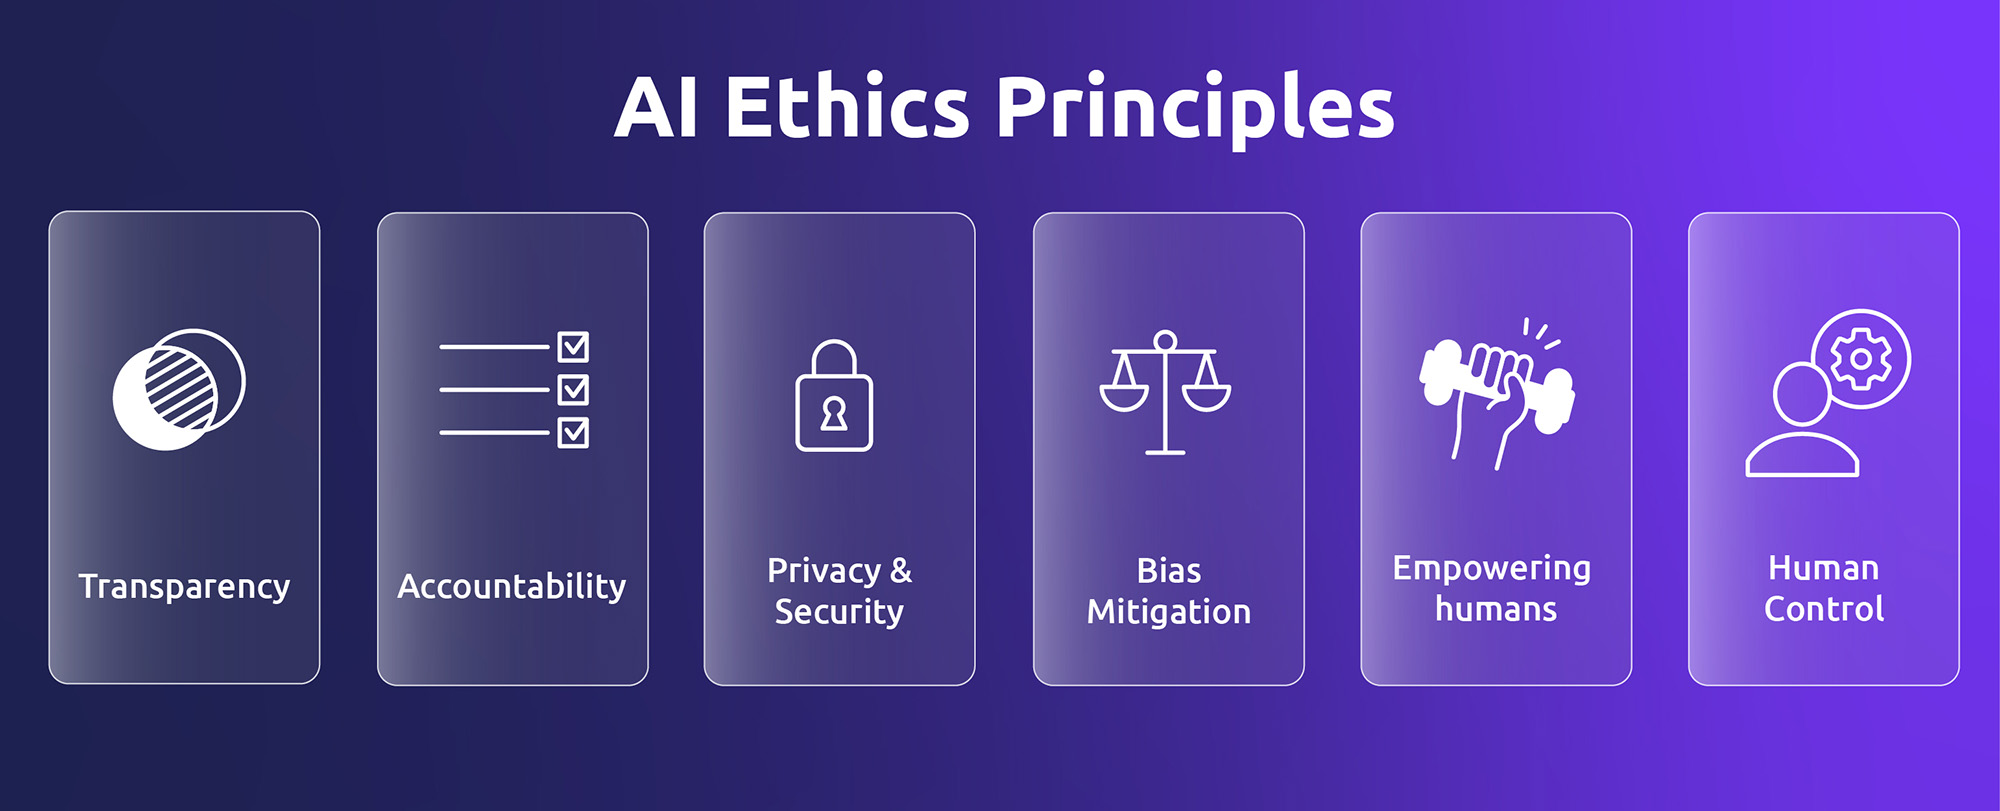 The principles of Artificial Intelligence Ethics